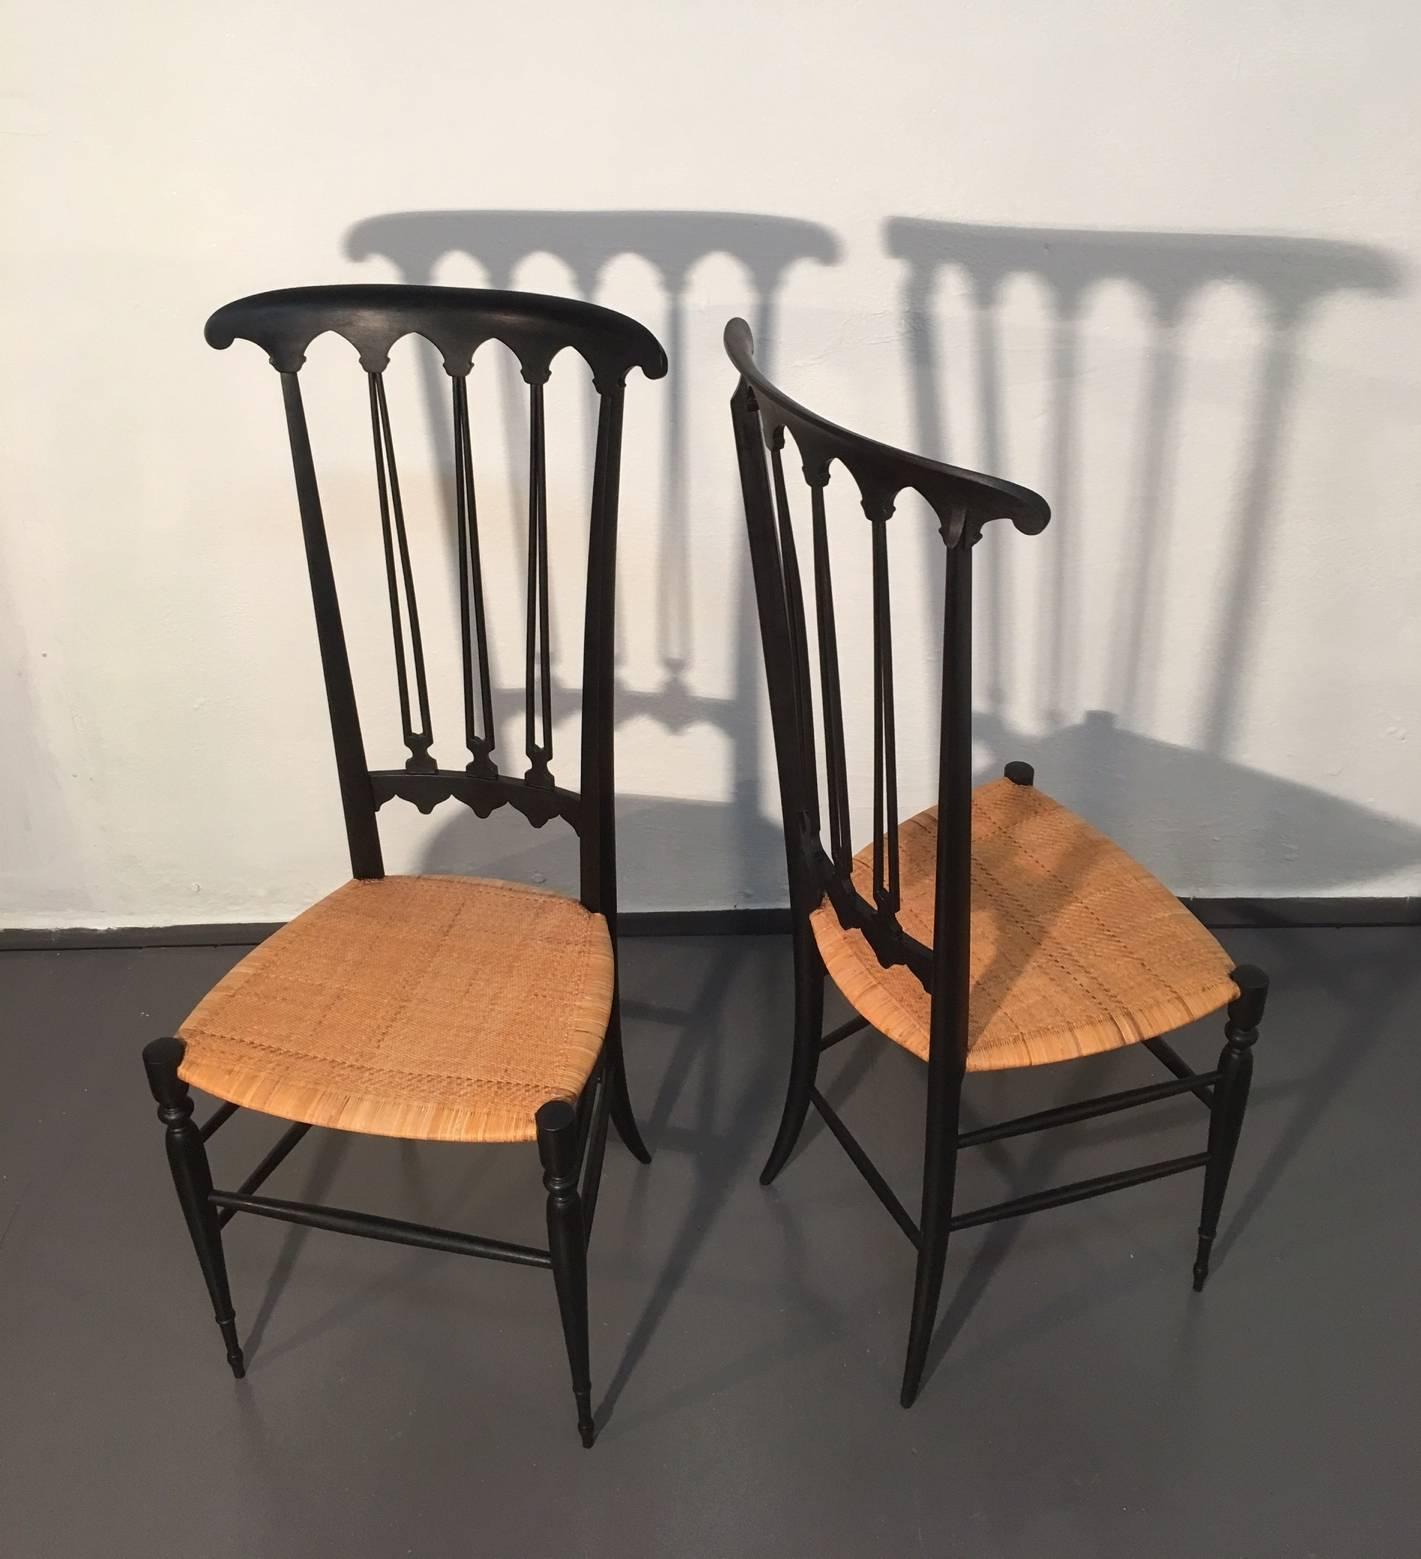 Lovely pair of Chiavari chairs of ebonized wood. Detailed high backrest with double spine and curved legs.